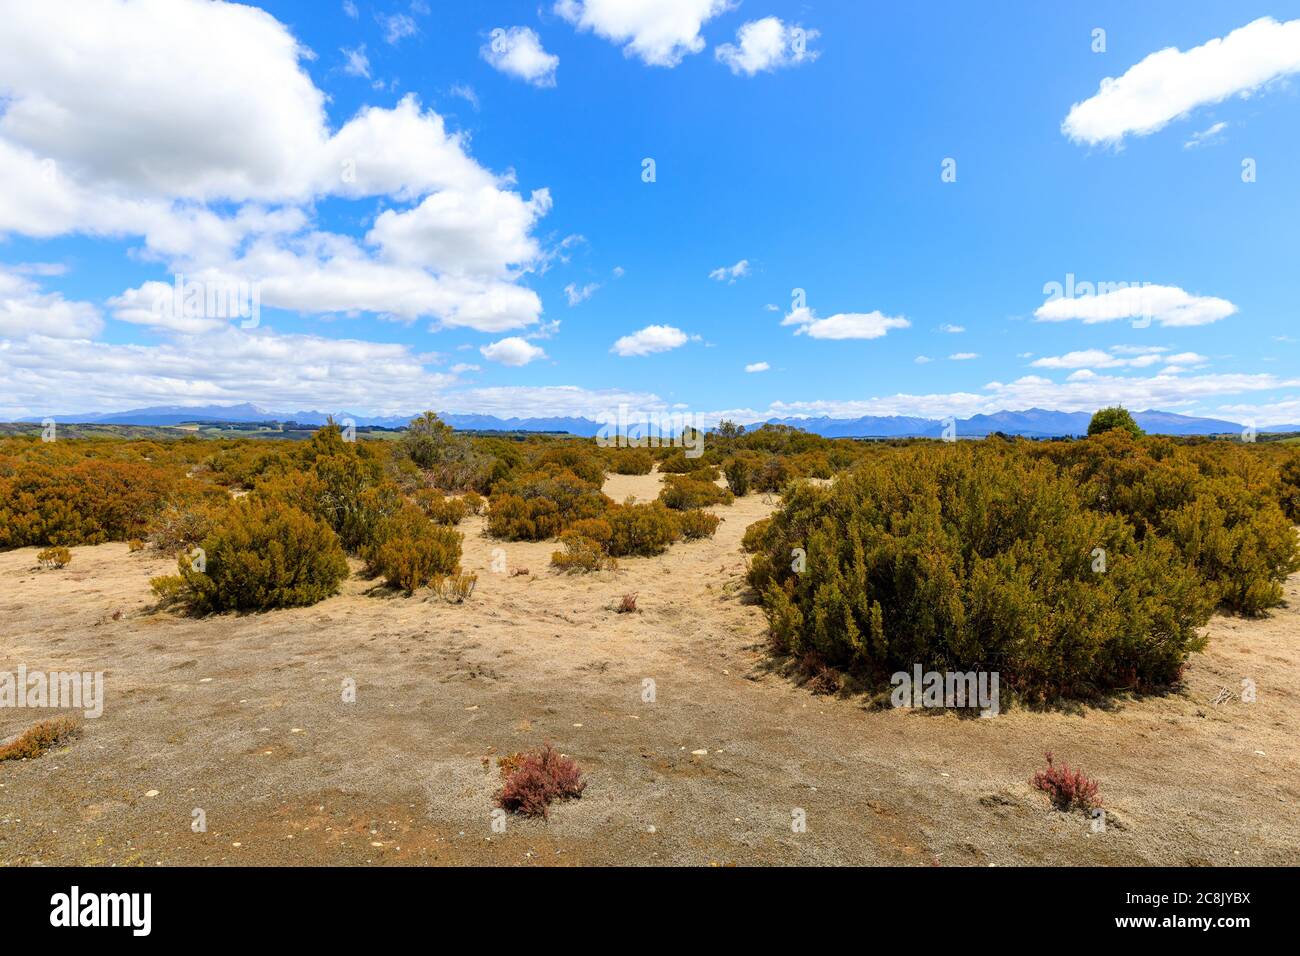 Ancient Bog Pine forest in the Wilderness Scientific Reserve with mountains in the distance and white clouds on a blue sky. Stock Photo